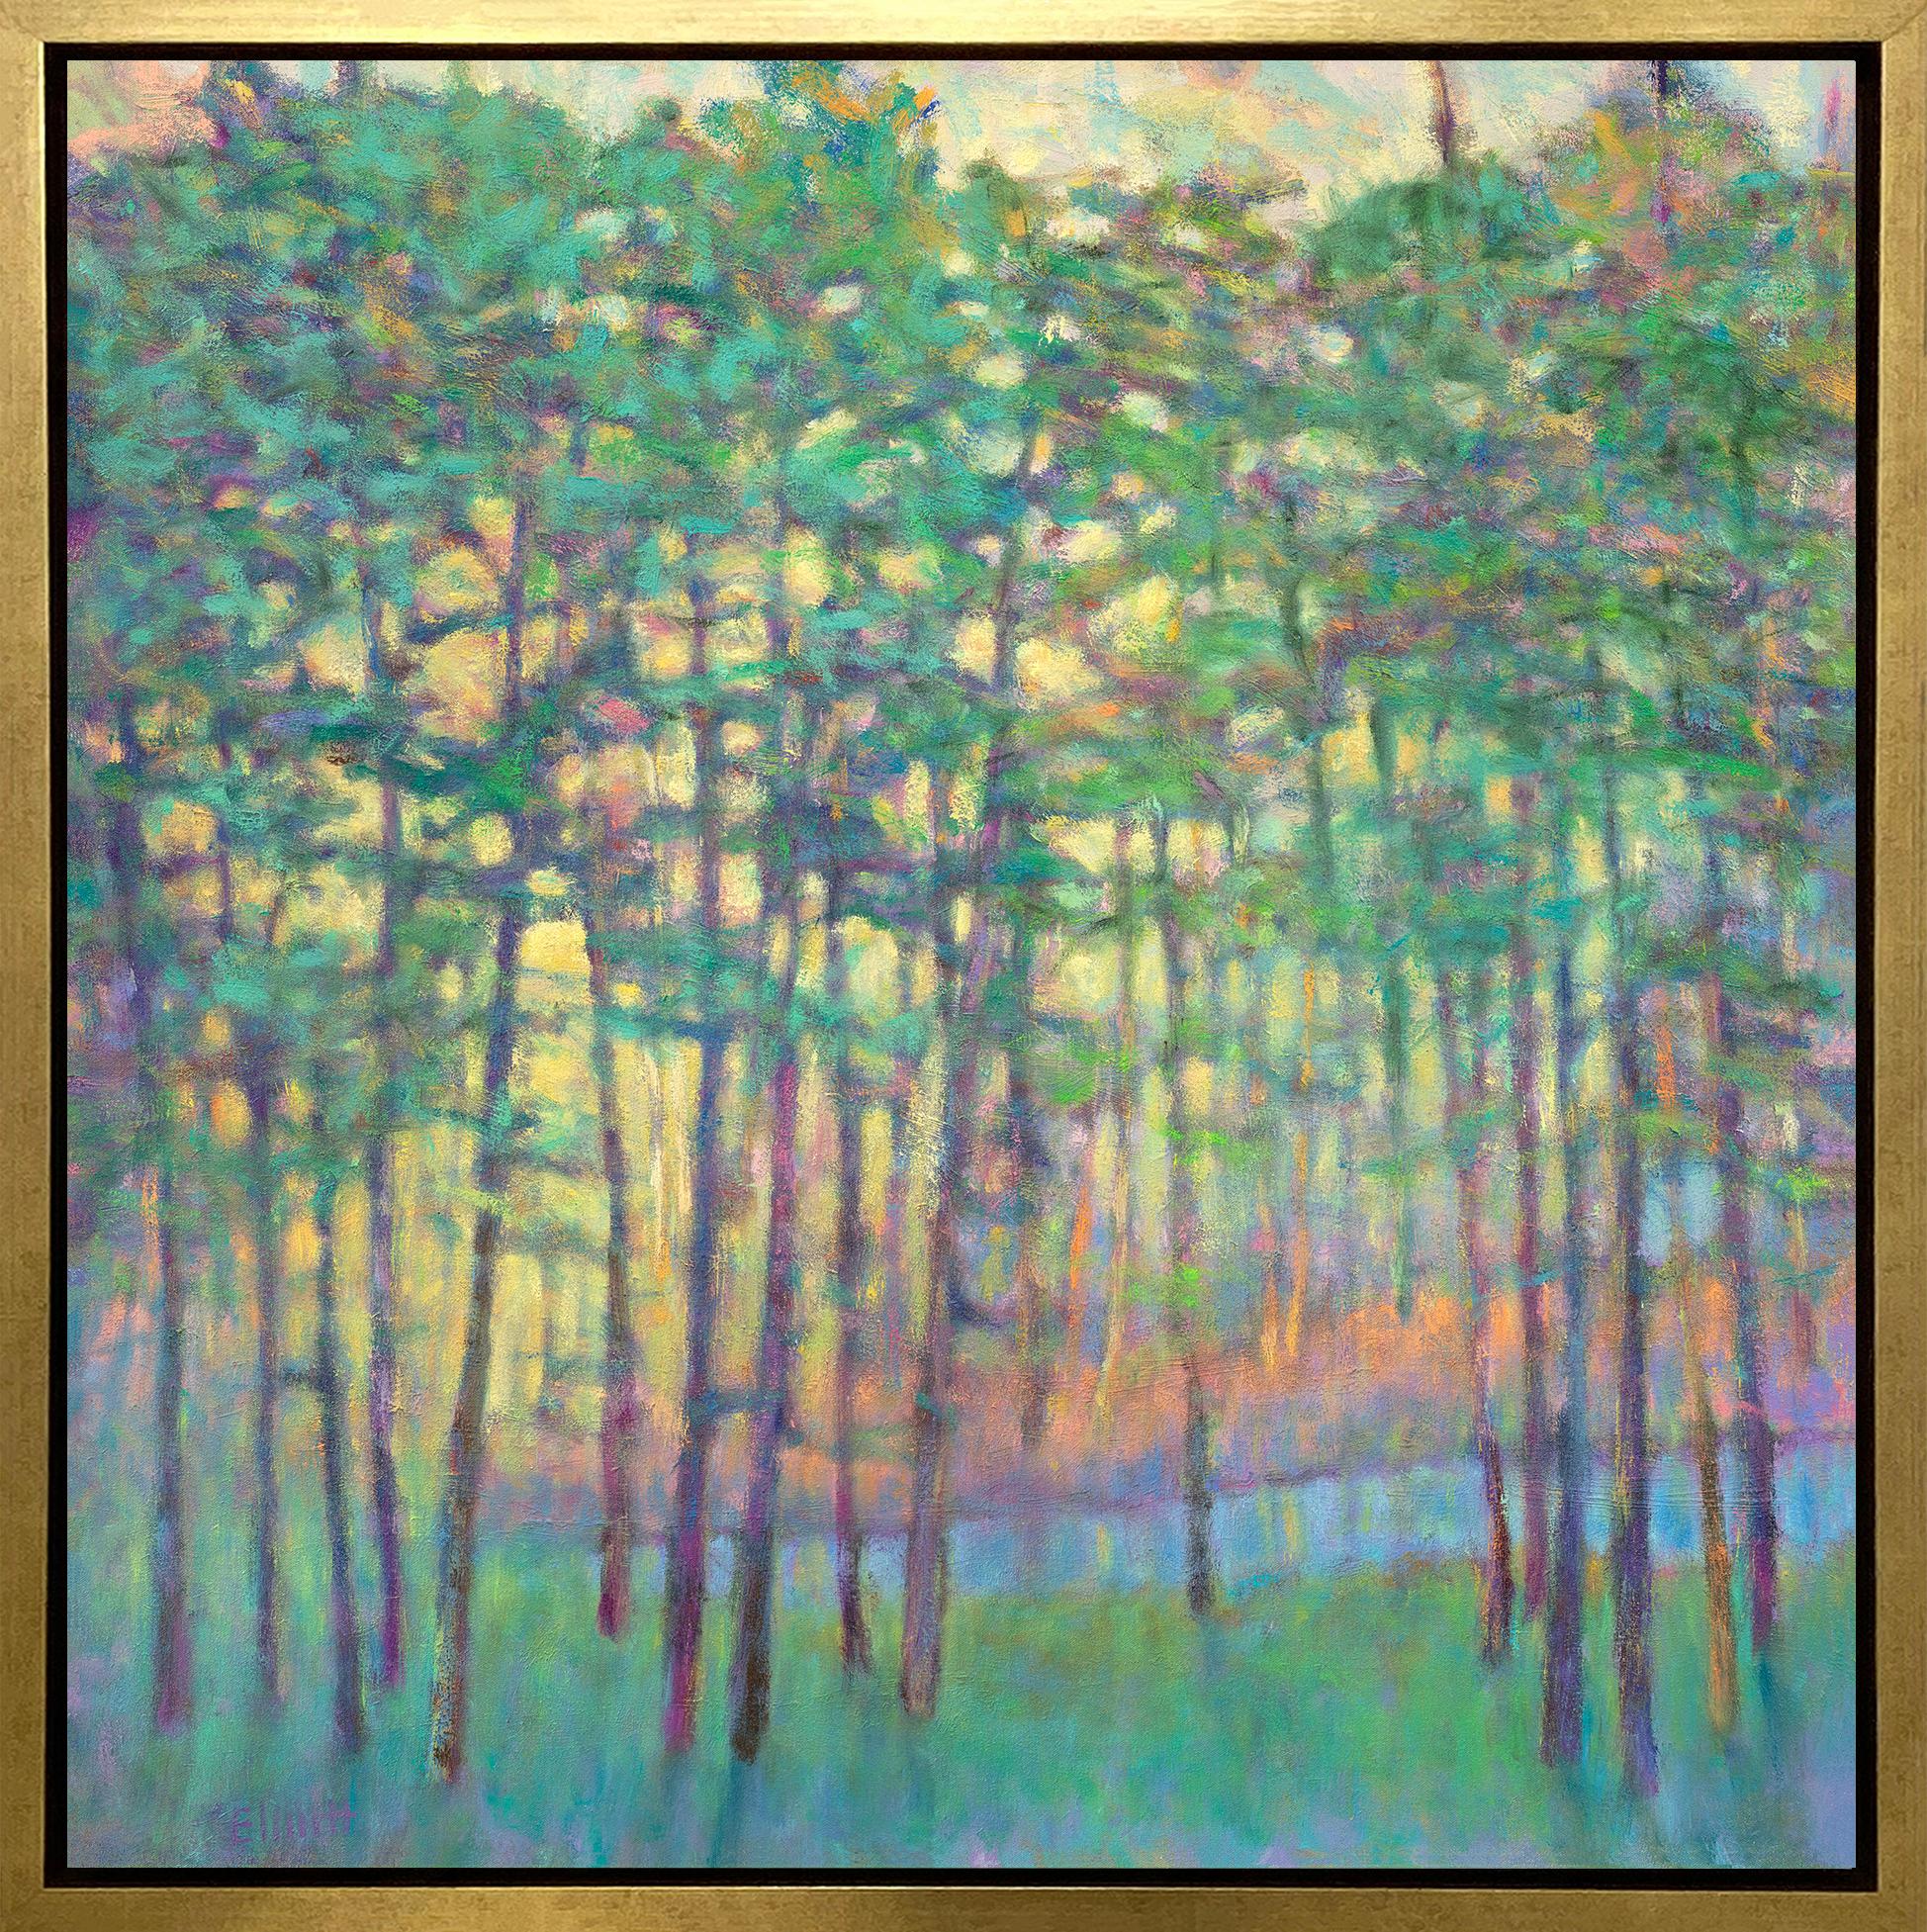 "Green Influences, " Framed Limited Edition Giclee Print, 30" x 30"